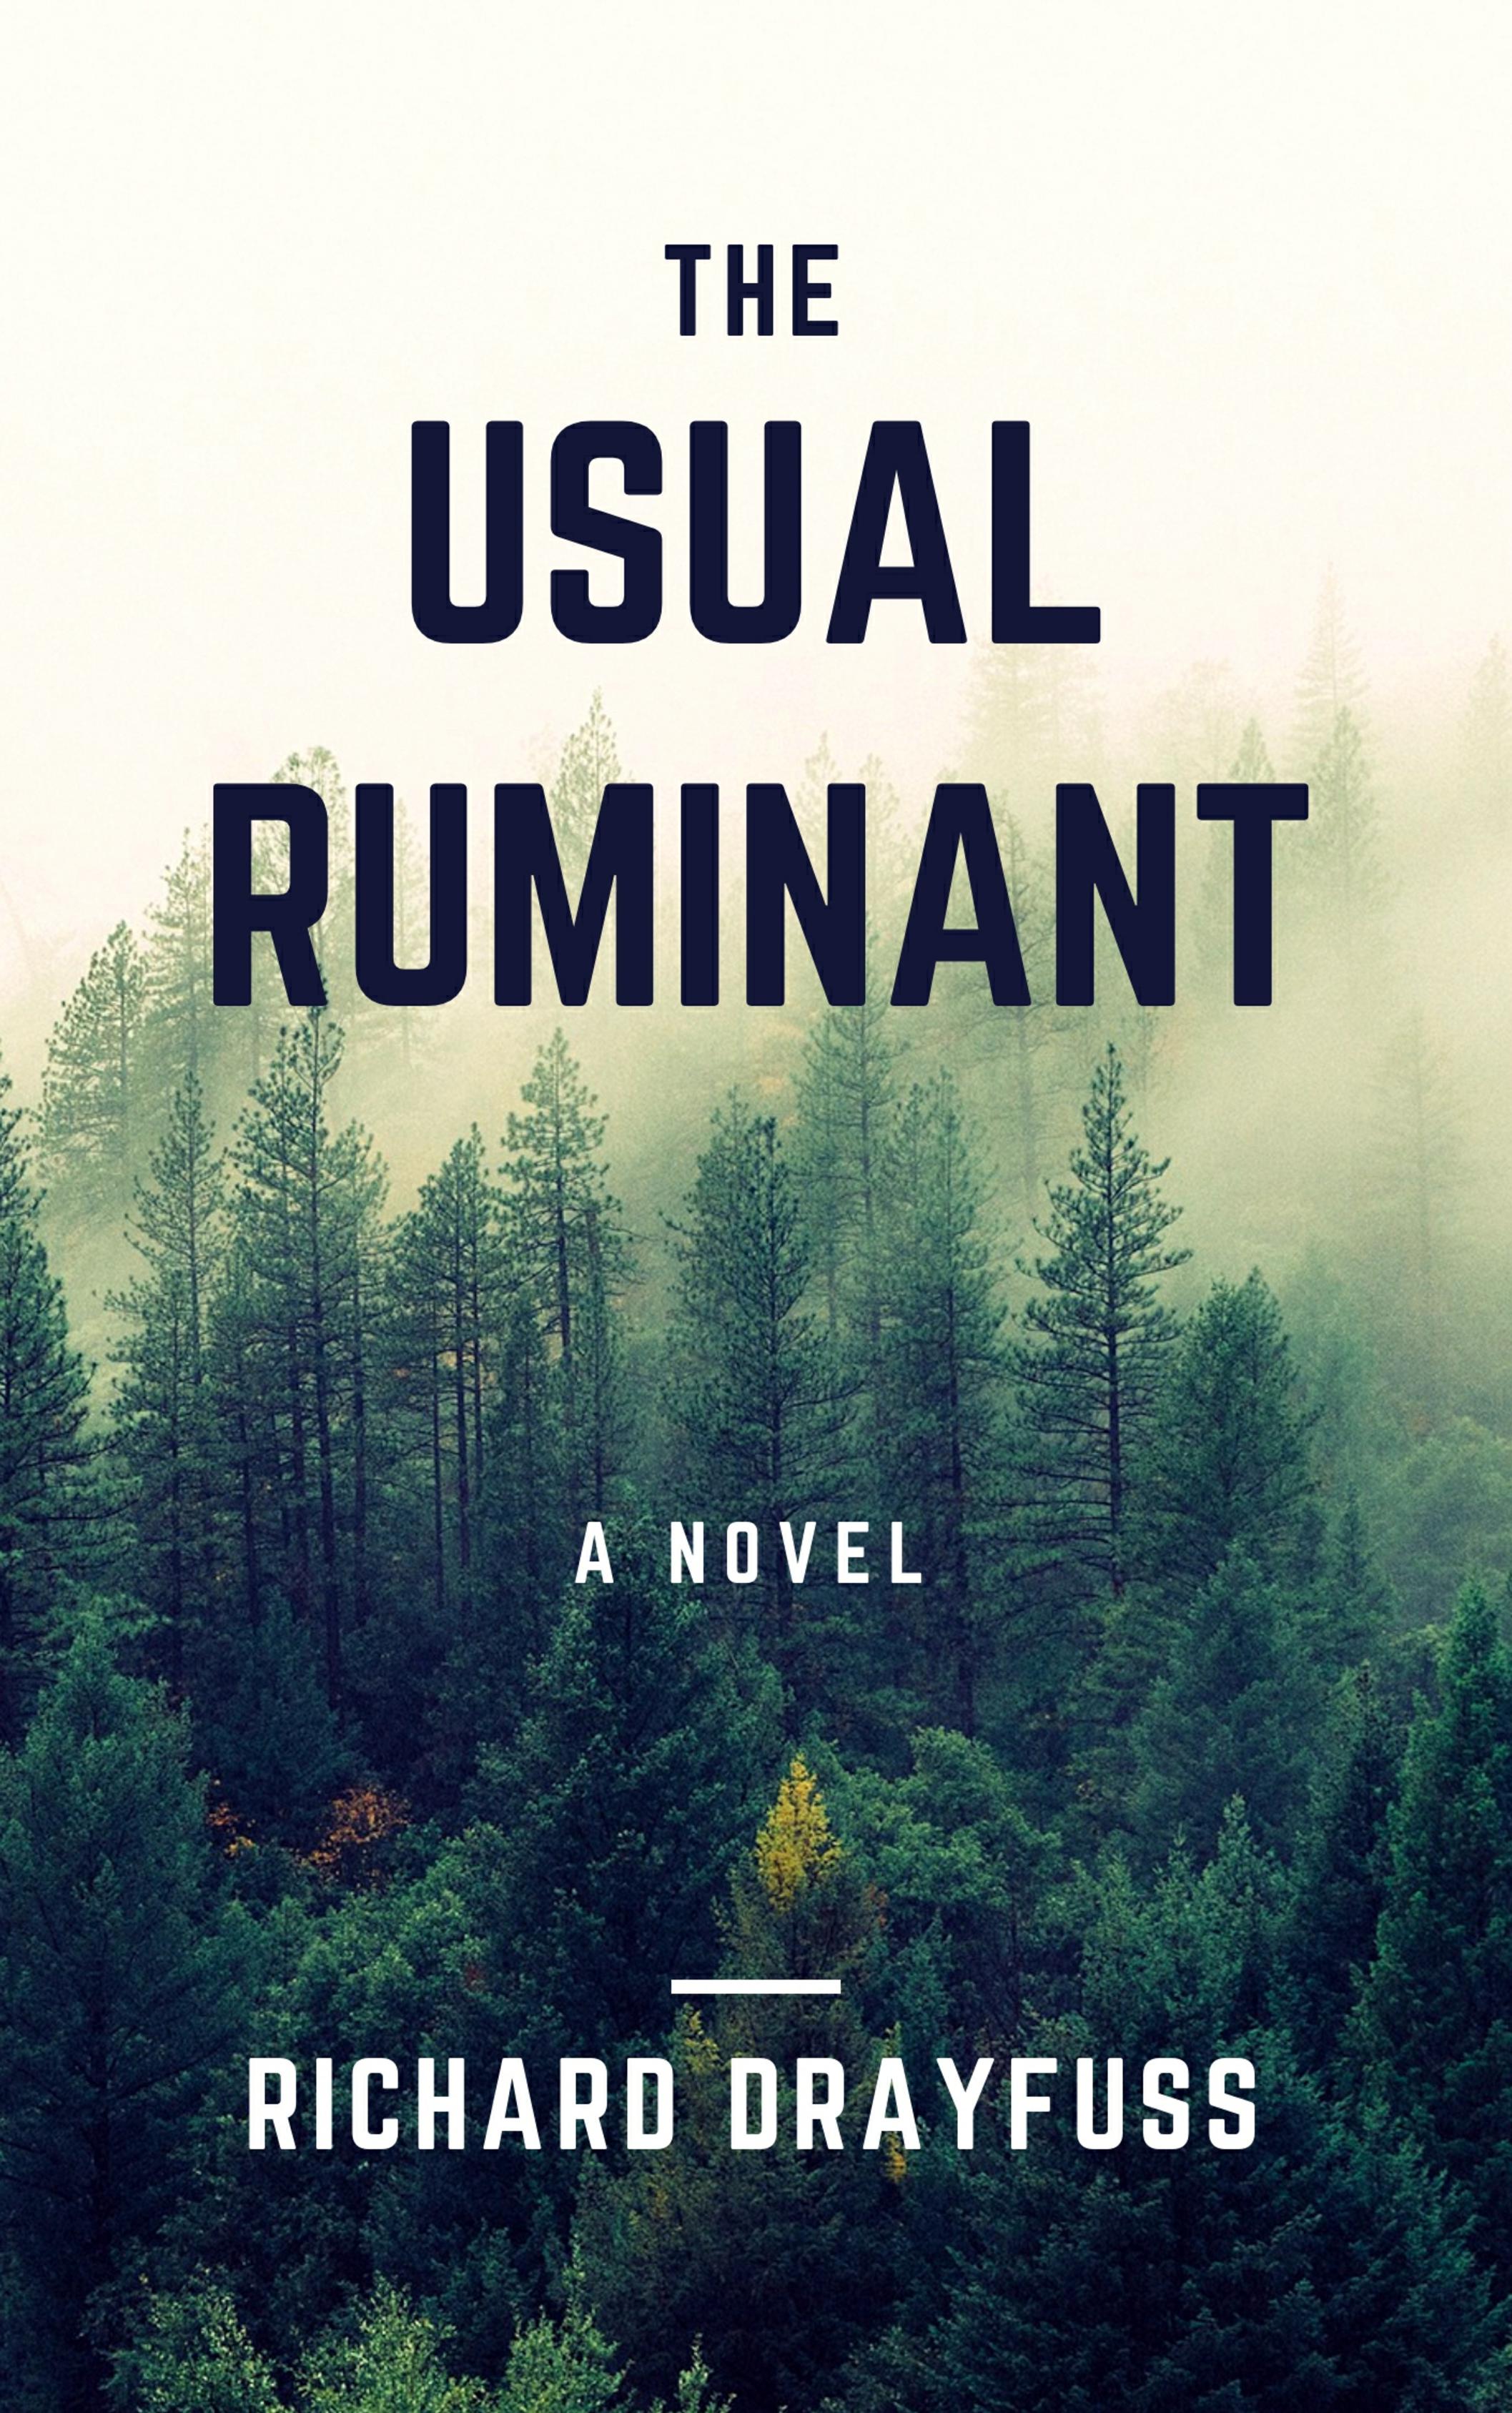 FREE: The Usual Ruminant by Richard Drayfuss